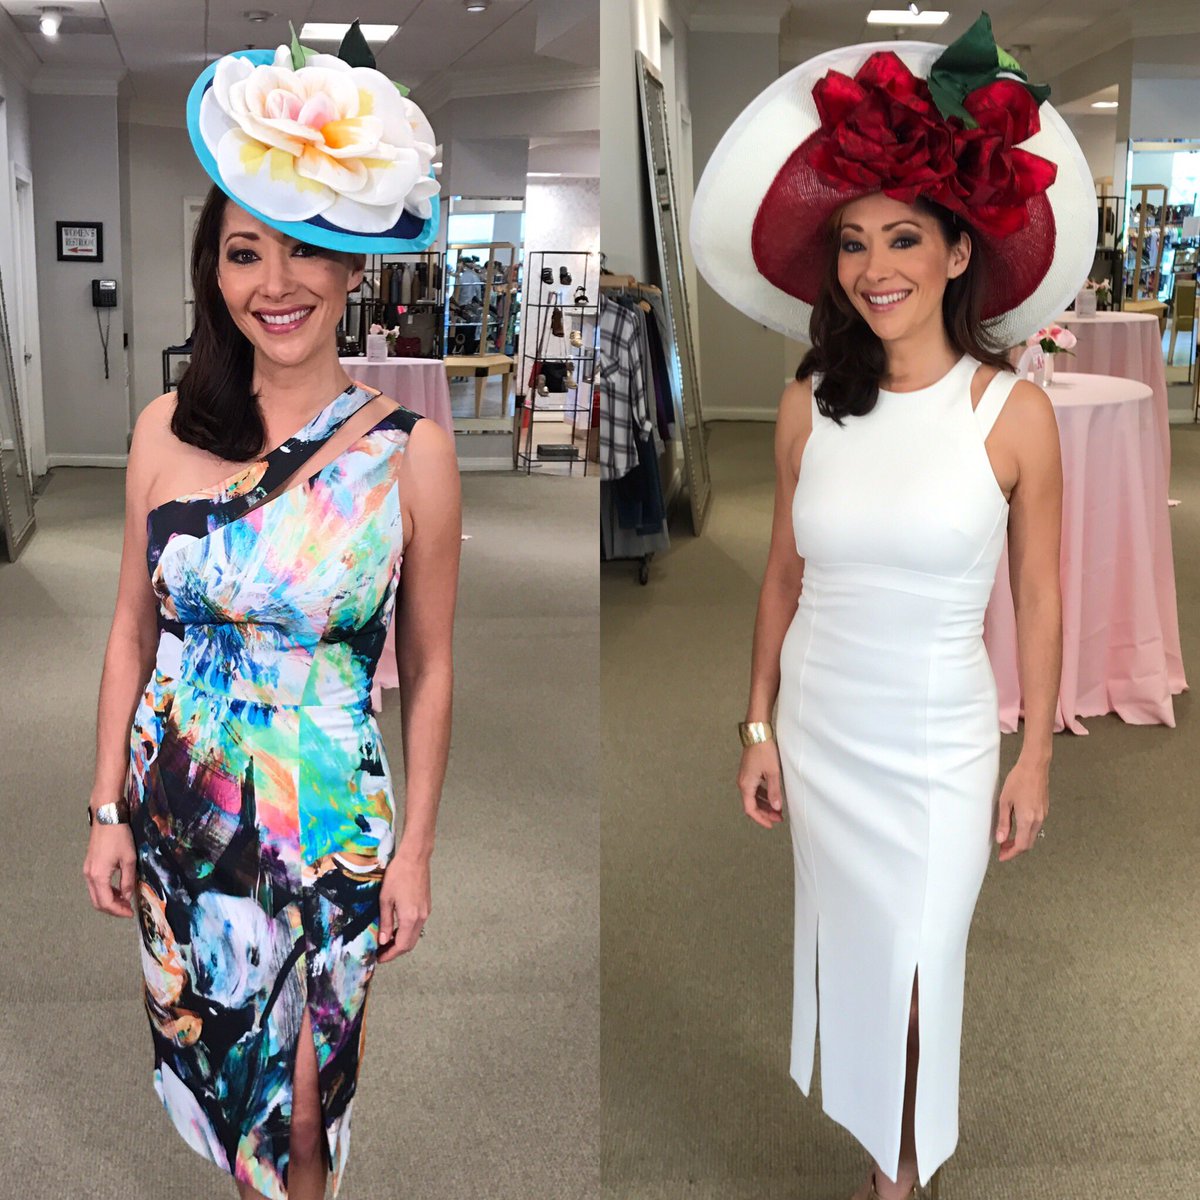 derby outfits